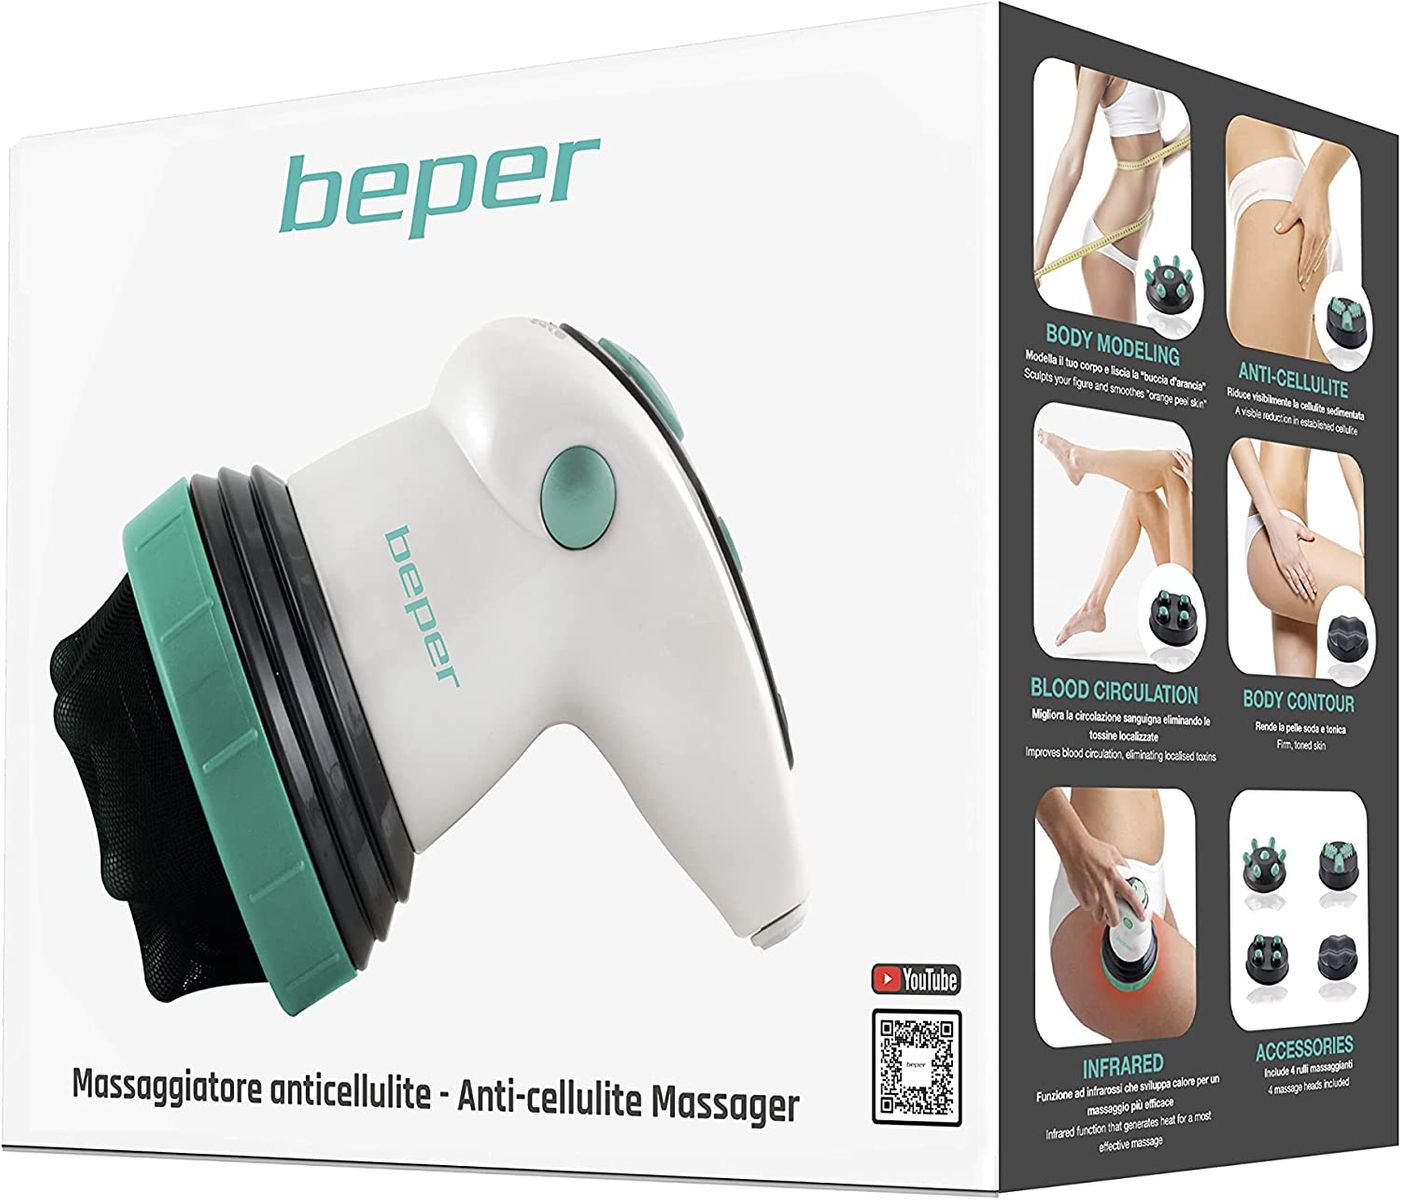 Beper - Infrared Massager Woman 4 in 1, infrared massage, triple circular action, firming and shaping, adjustable strengths, 4 anti-cellulite massage modes.